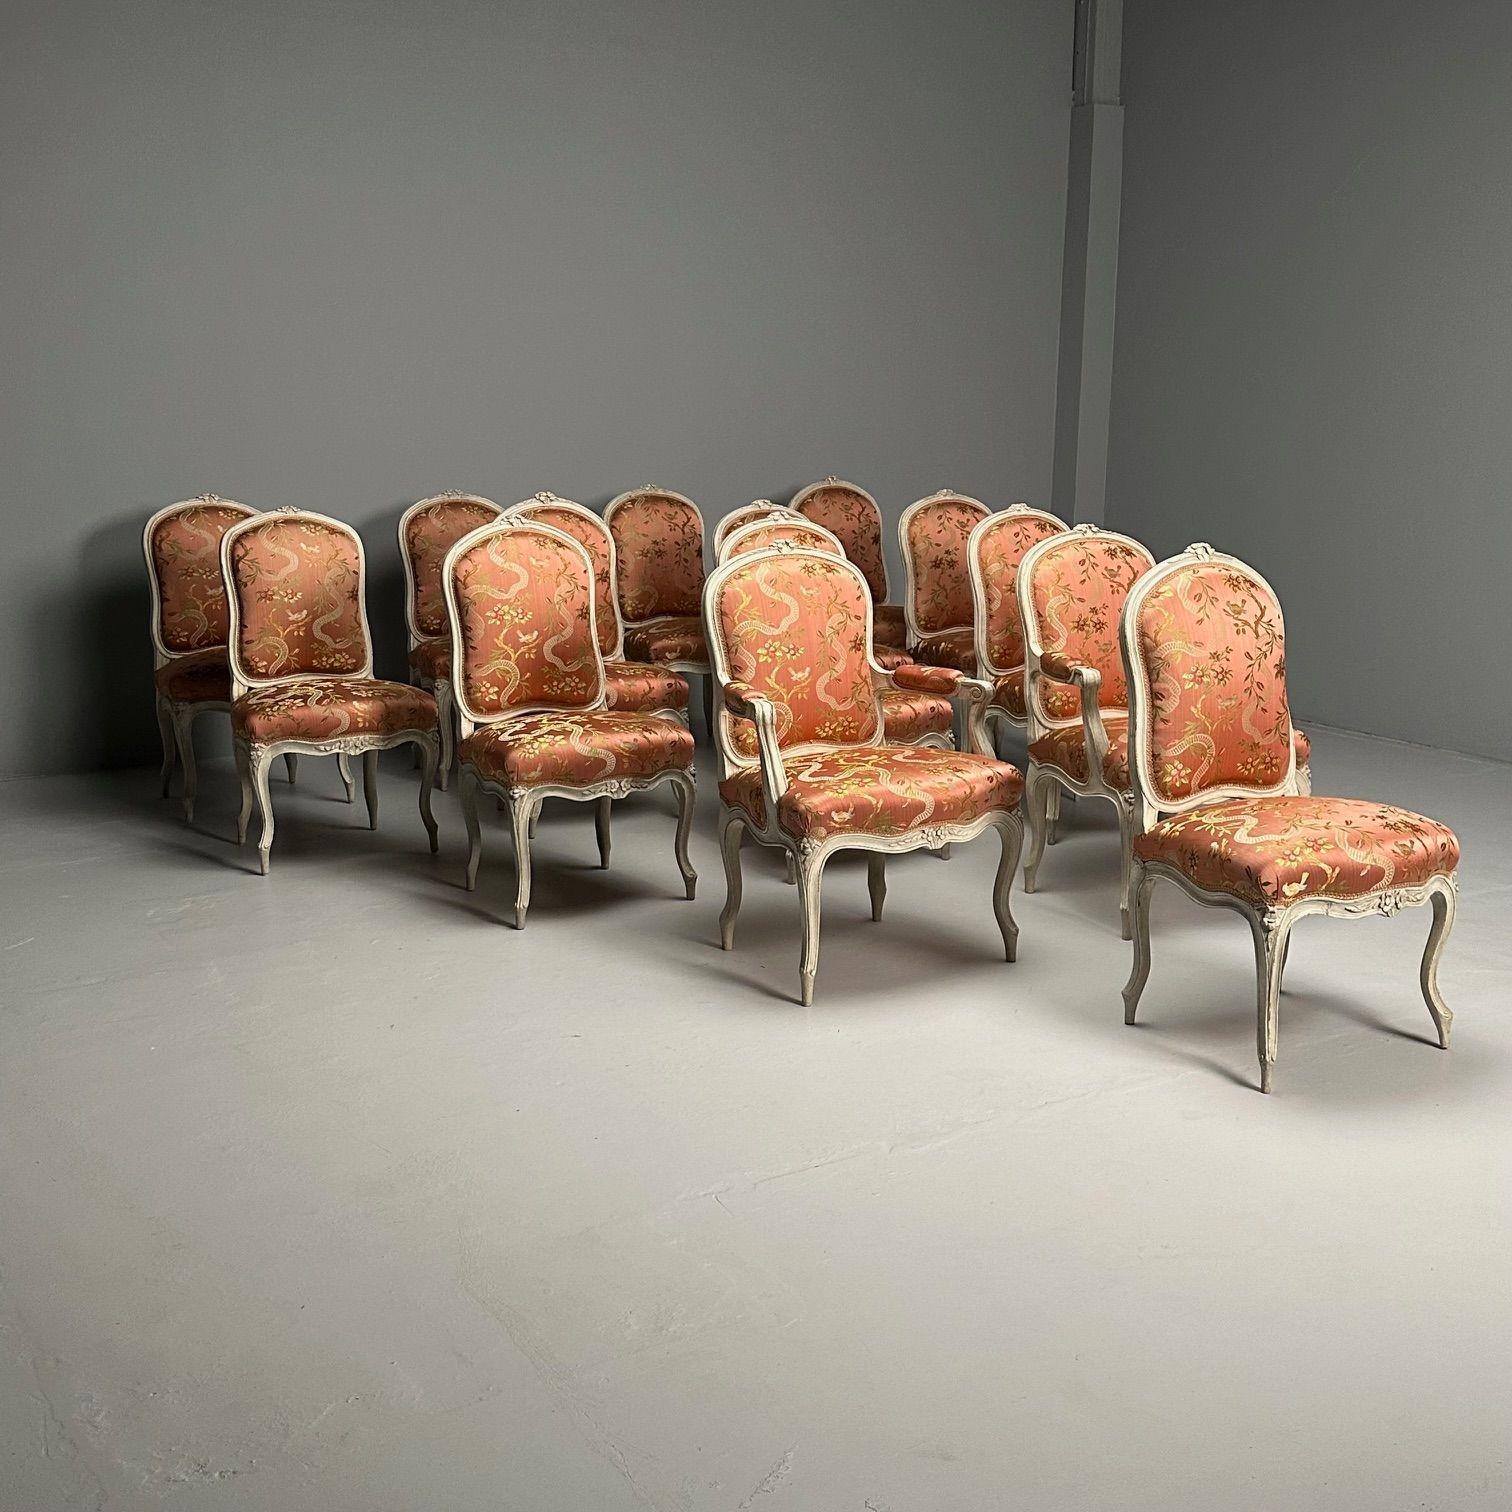 Upholstery Jean Baptist Cresson, Louis XV, 14 Dining Chairs, France, 18th C., Christies For Sale